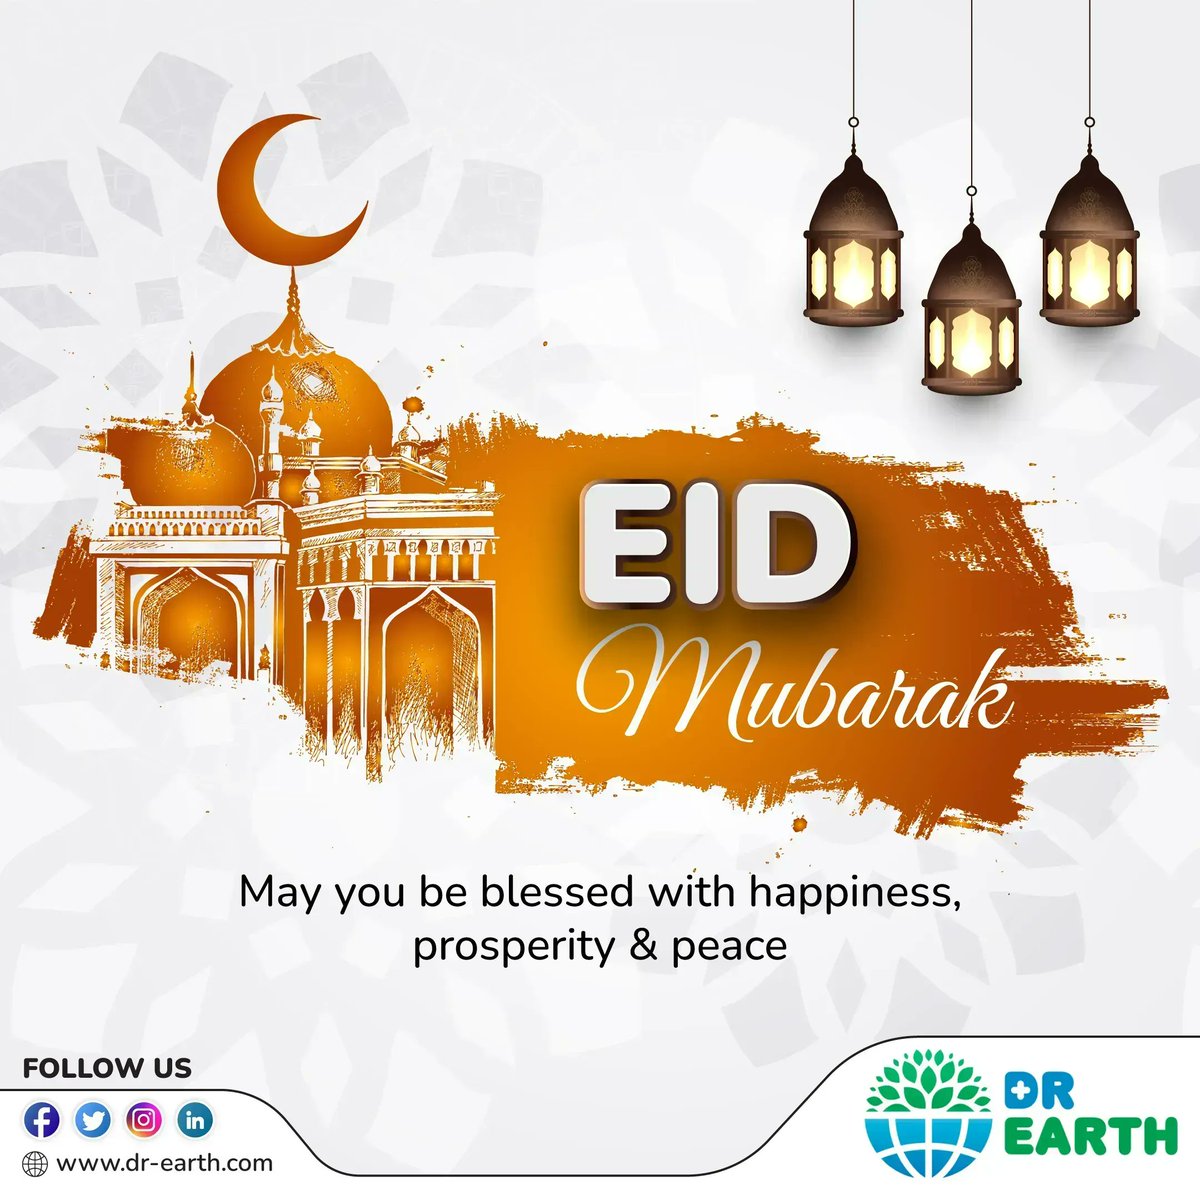 Eid Mubarak!
Let’s use this day to make a difference - donate, volunteer, and spread kindness. 
Join us in the mission of healing our planet and ideas openly so we can create positive change.

#uaeeid #eidinbahrain #greencommunity #ramadanmubarak #Eid2023 #healtheearth #drearth